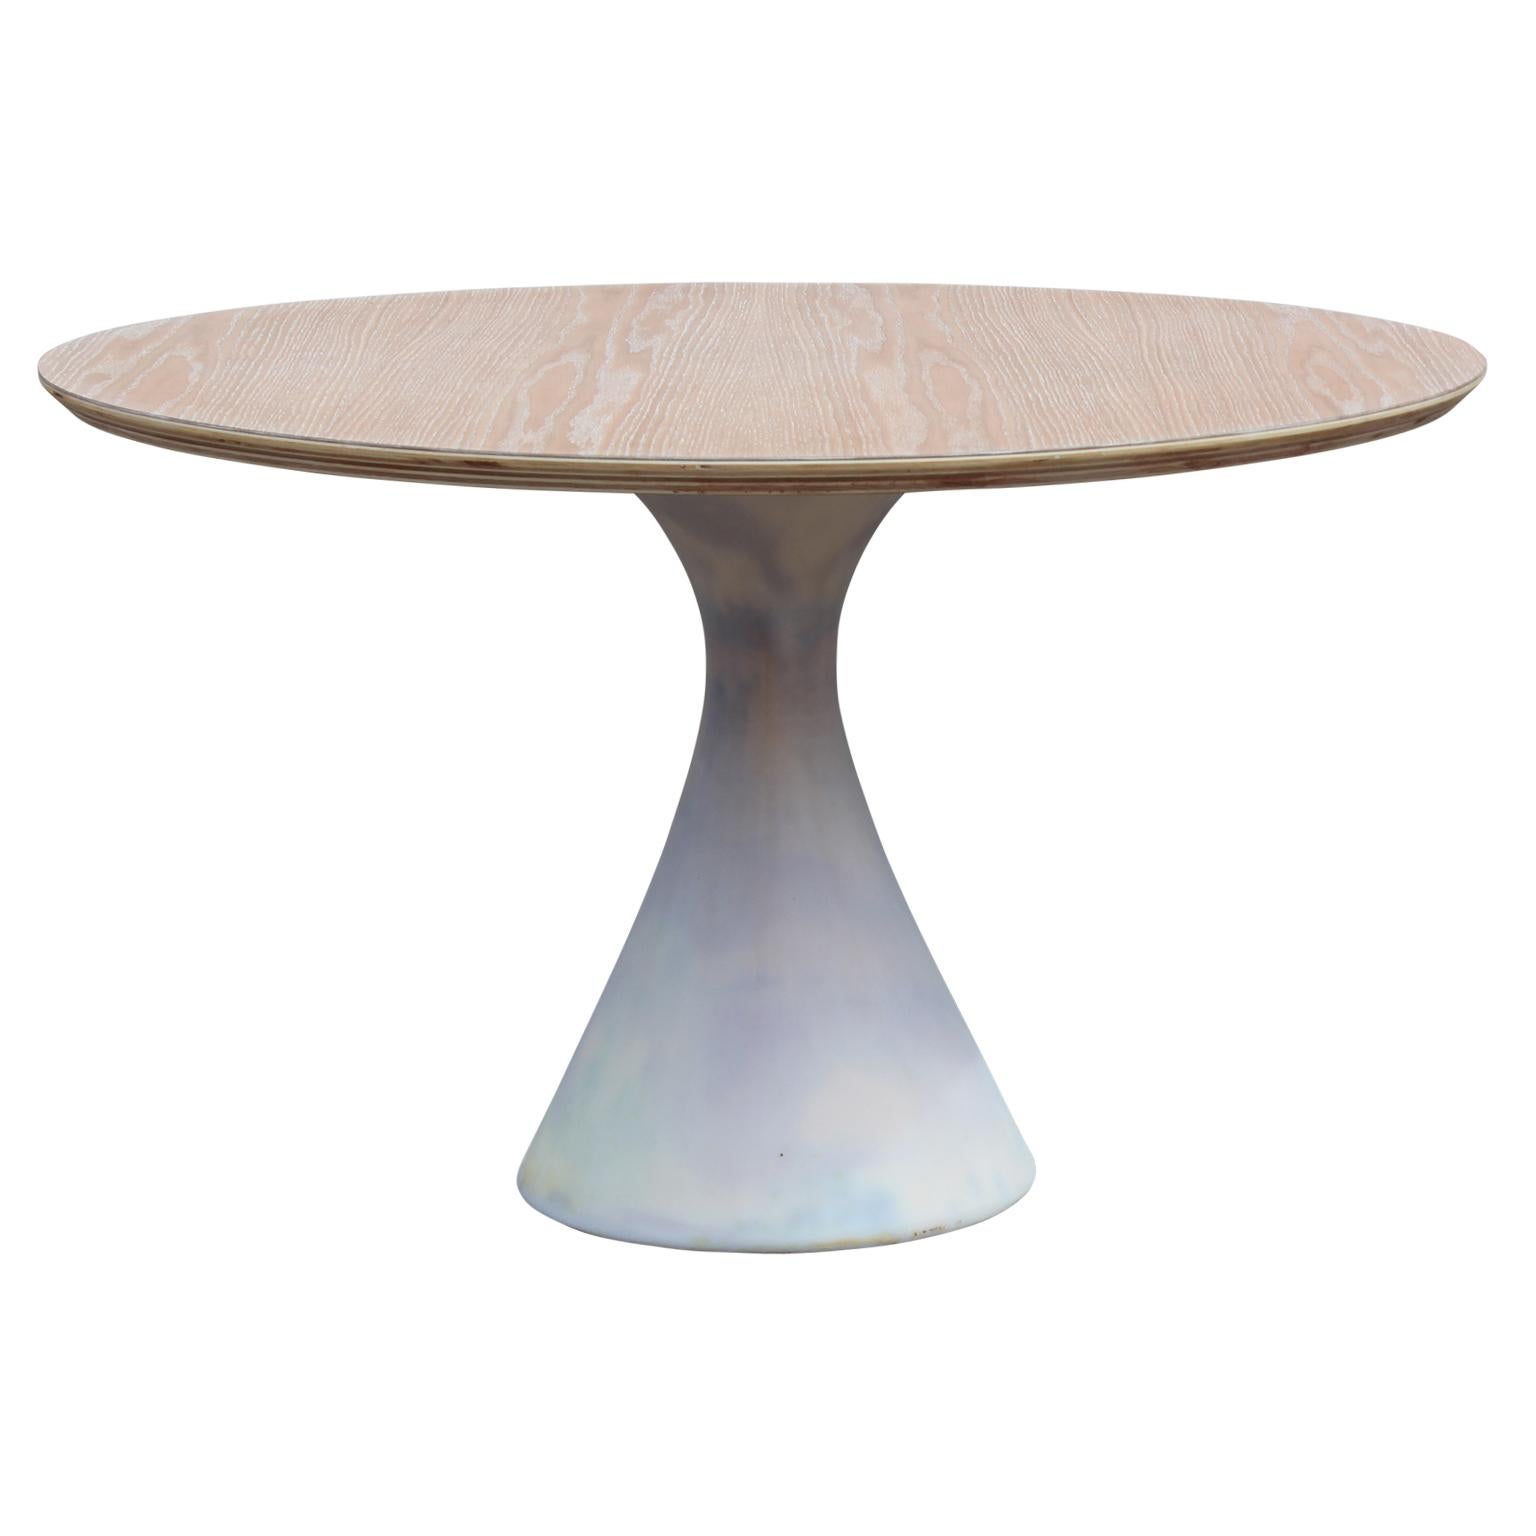 Simple and elegant custom postmodern 48 inch round tulip table made from wood in the style of Knoll and Searnen.